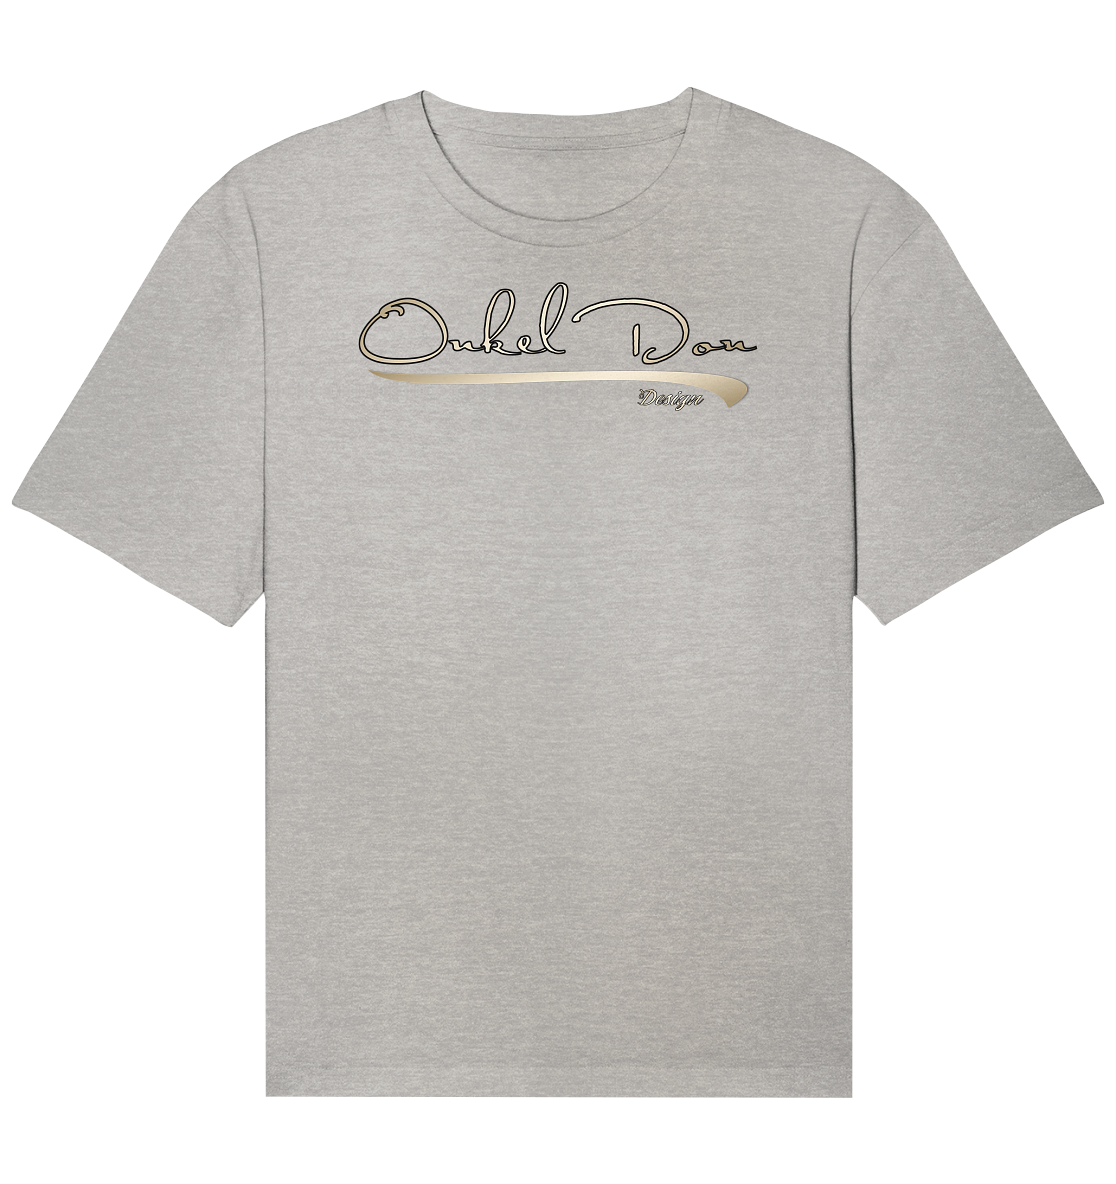 Onkel Don New Edition - Organic Relaxed Shirt - Onkel Don